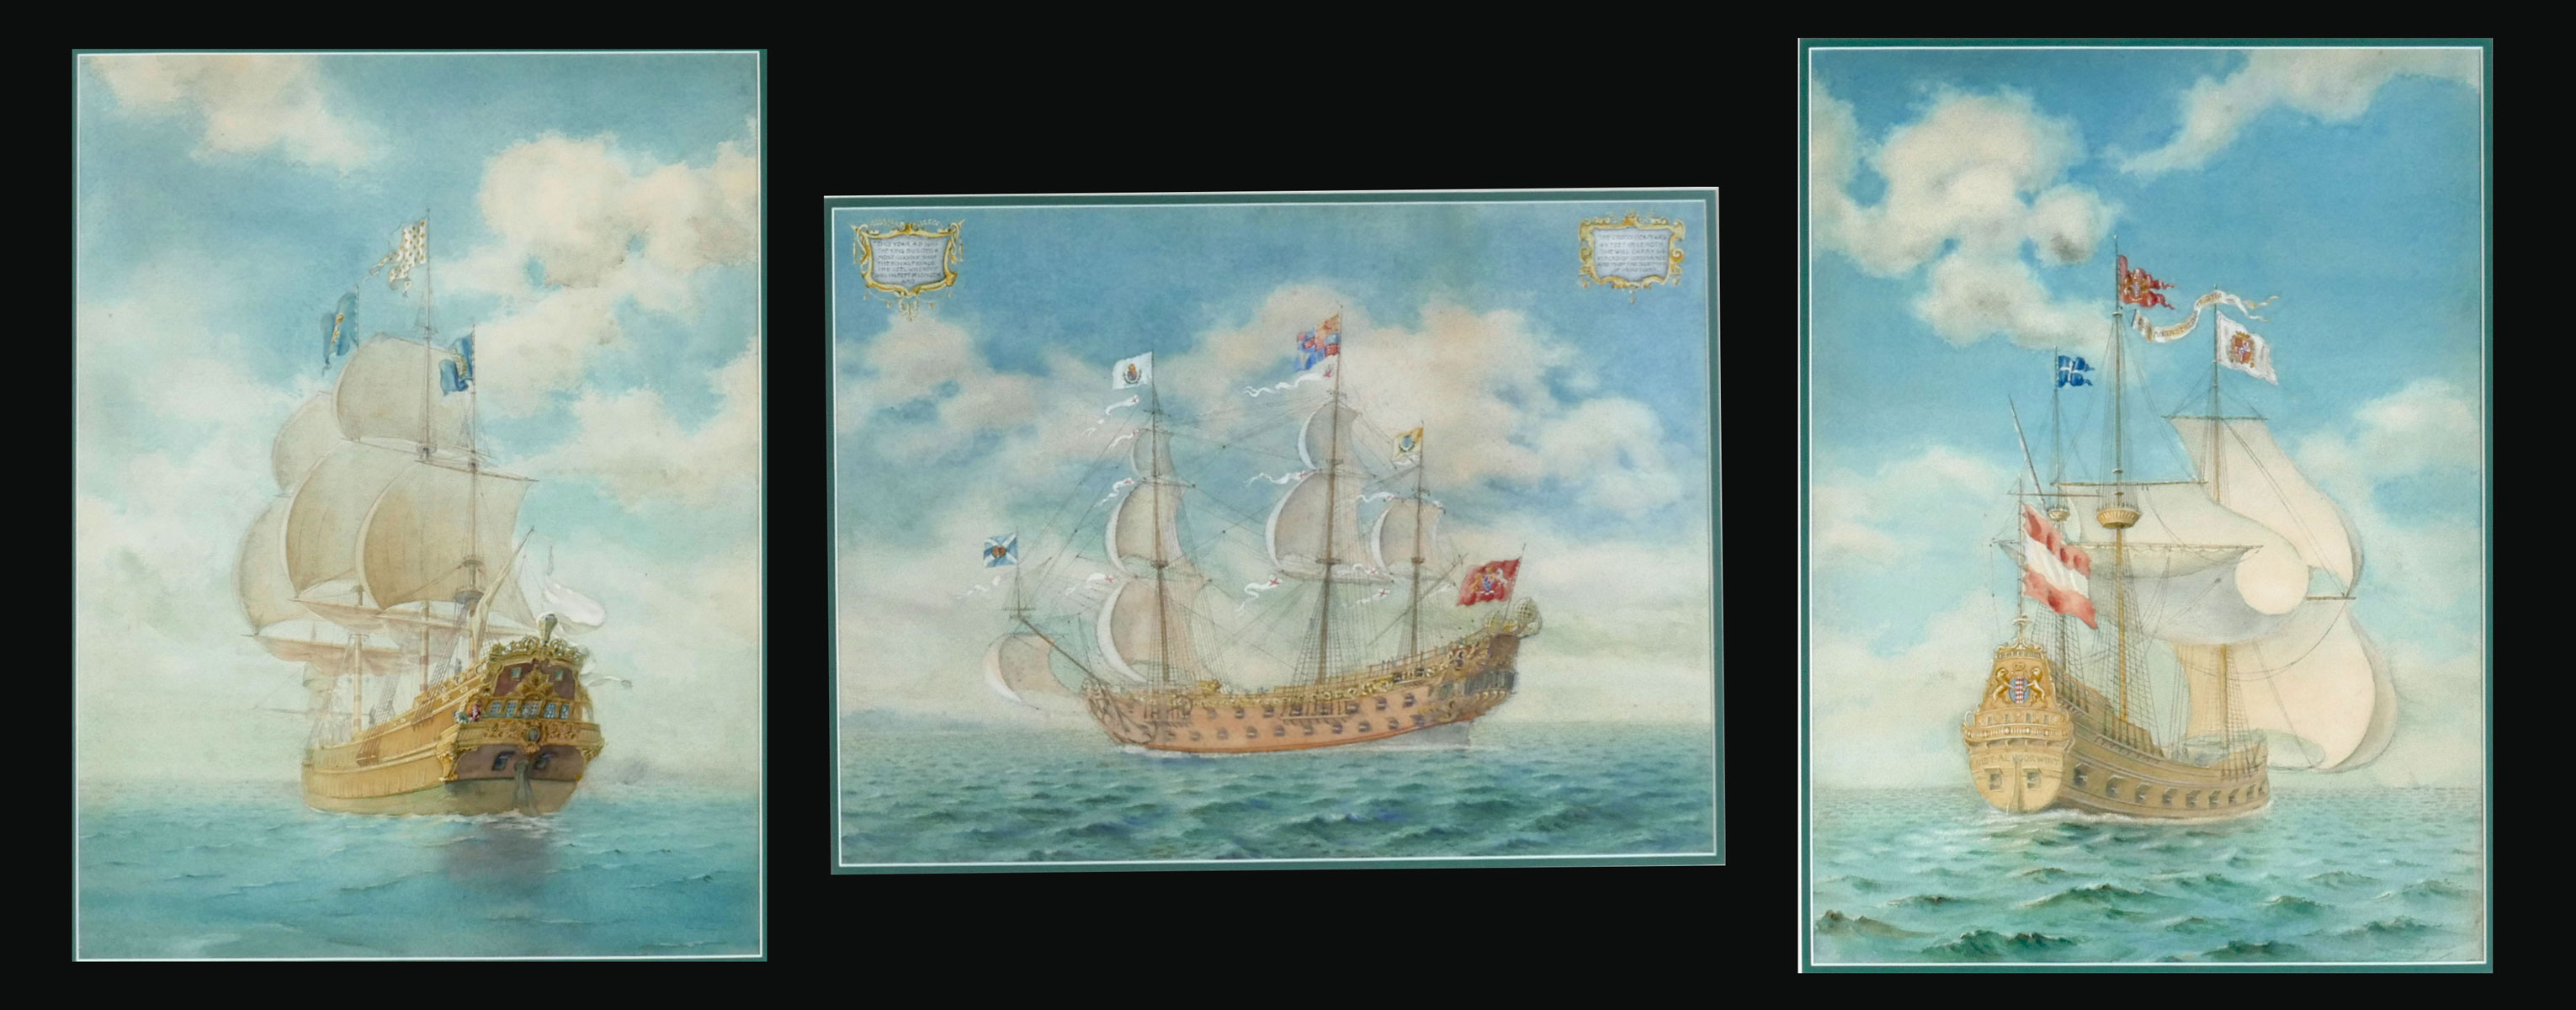 3 PIECE SHIP PAINTINGS: 1) THE